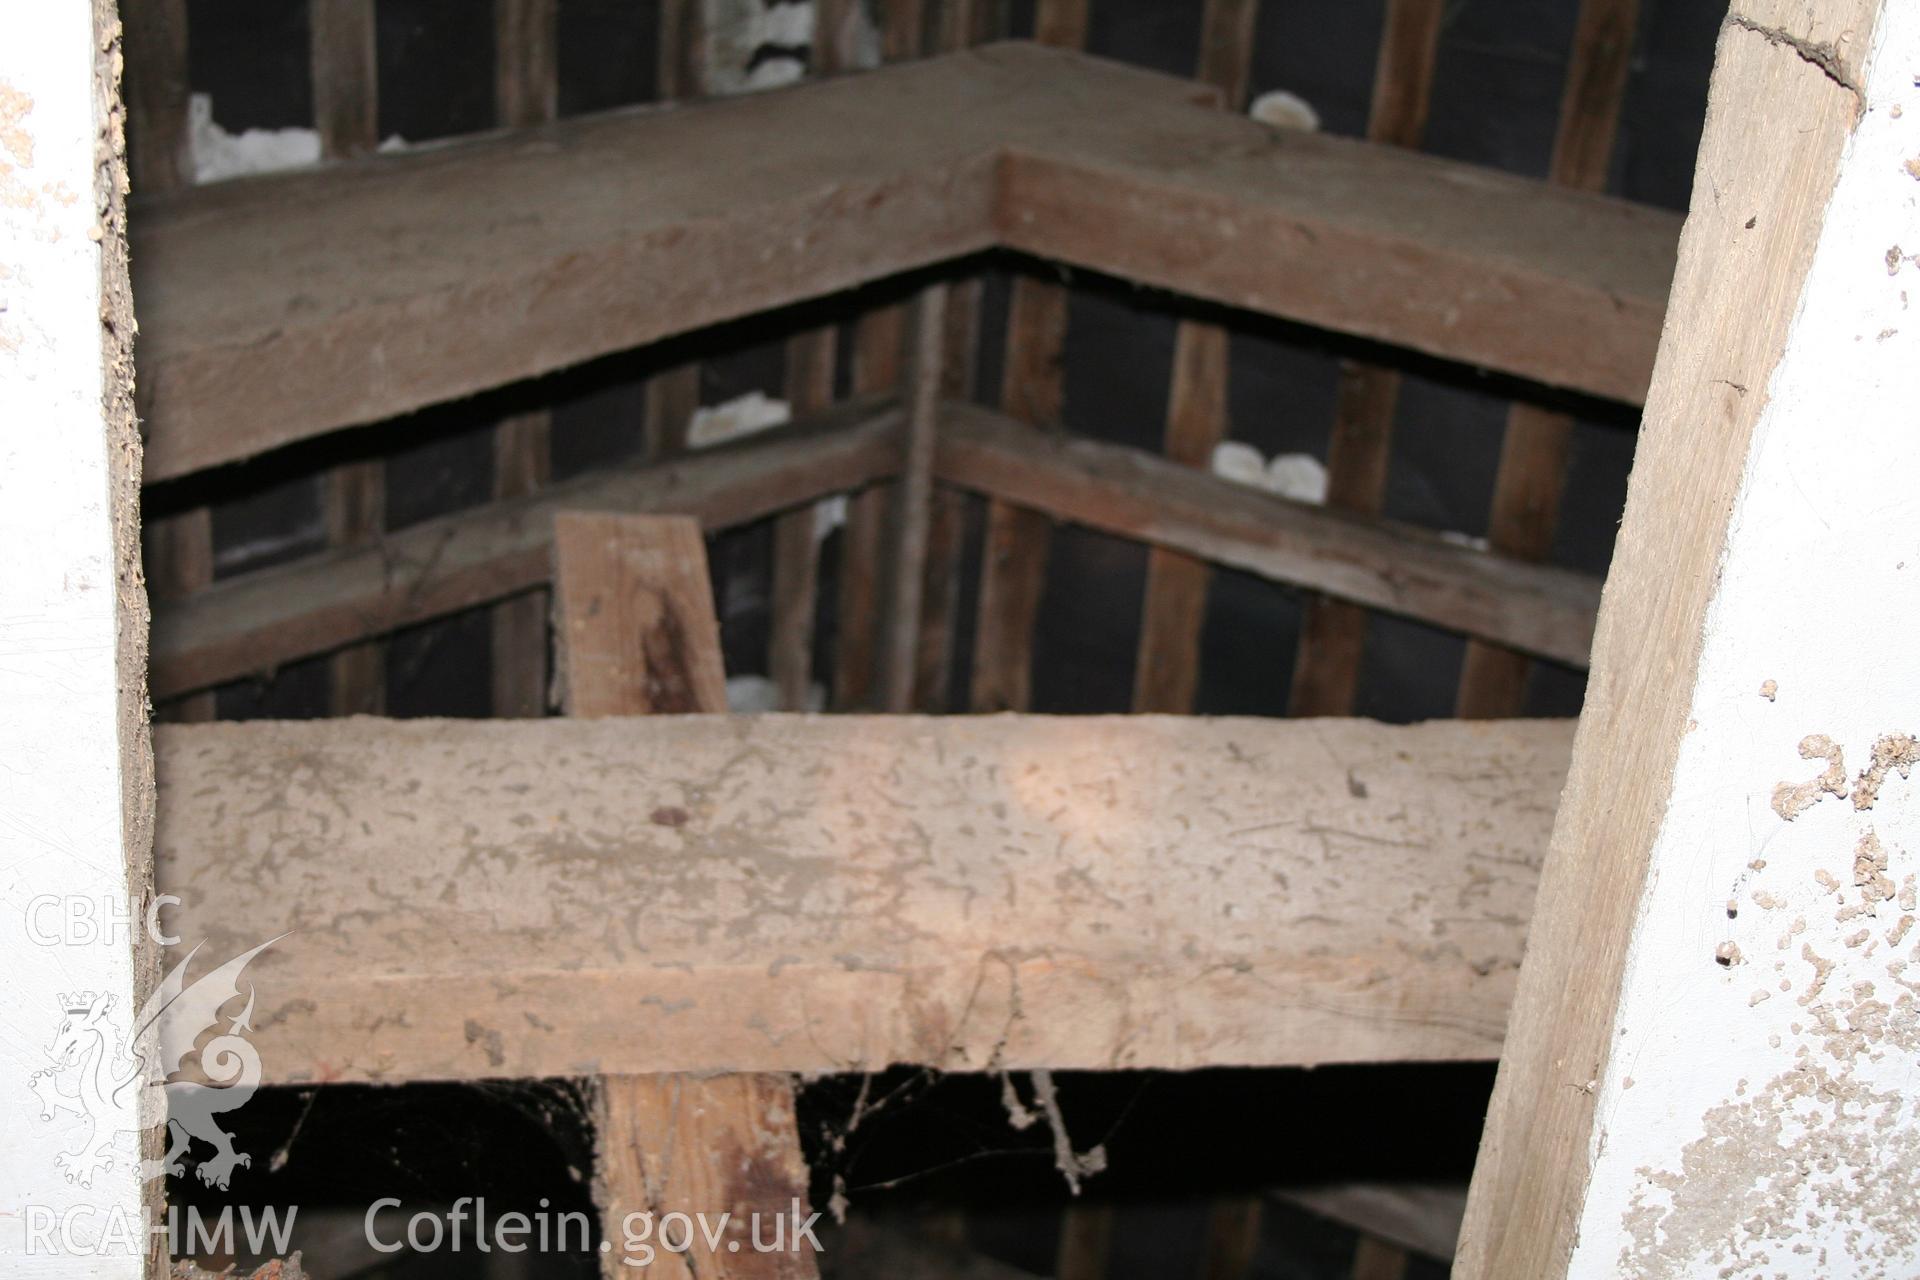 Interior view looking up at rafters in cattle shelter. Photographic survey of the southern range of cowhouses at Tan-y-Graig Farm, Llanfarian. Conducted by Geoff Ward and John Wiles, 11th December 2006.